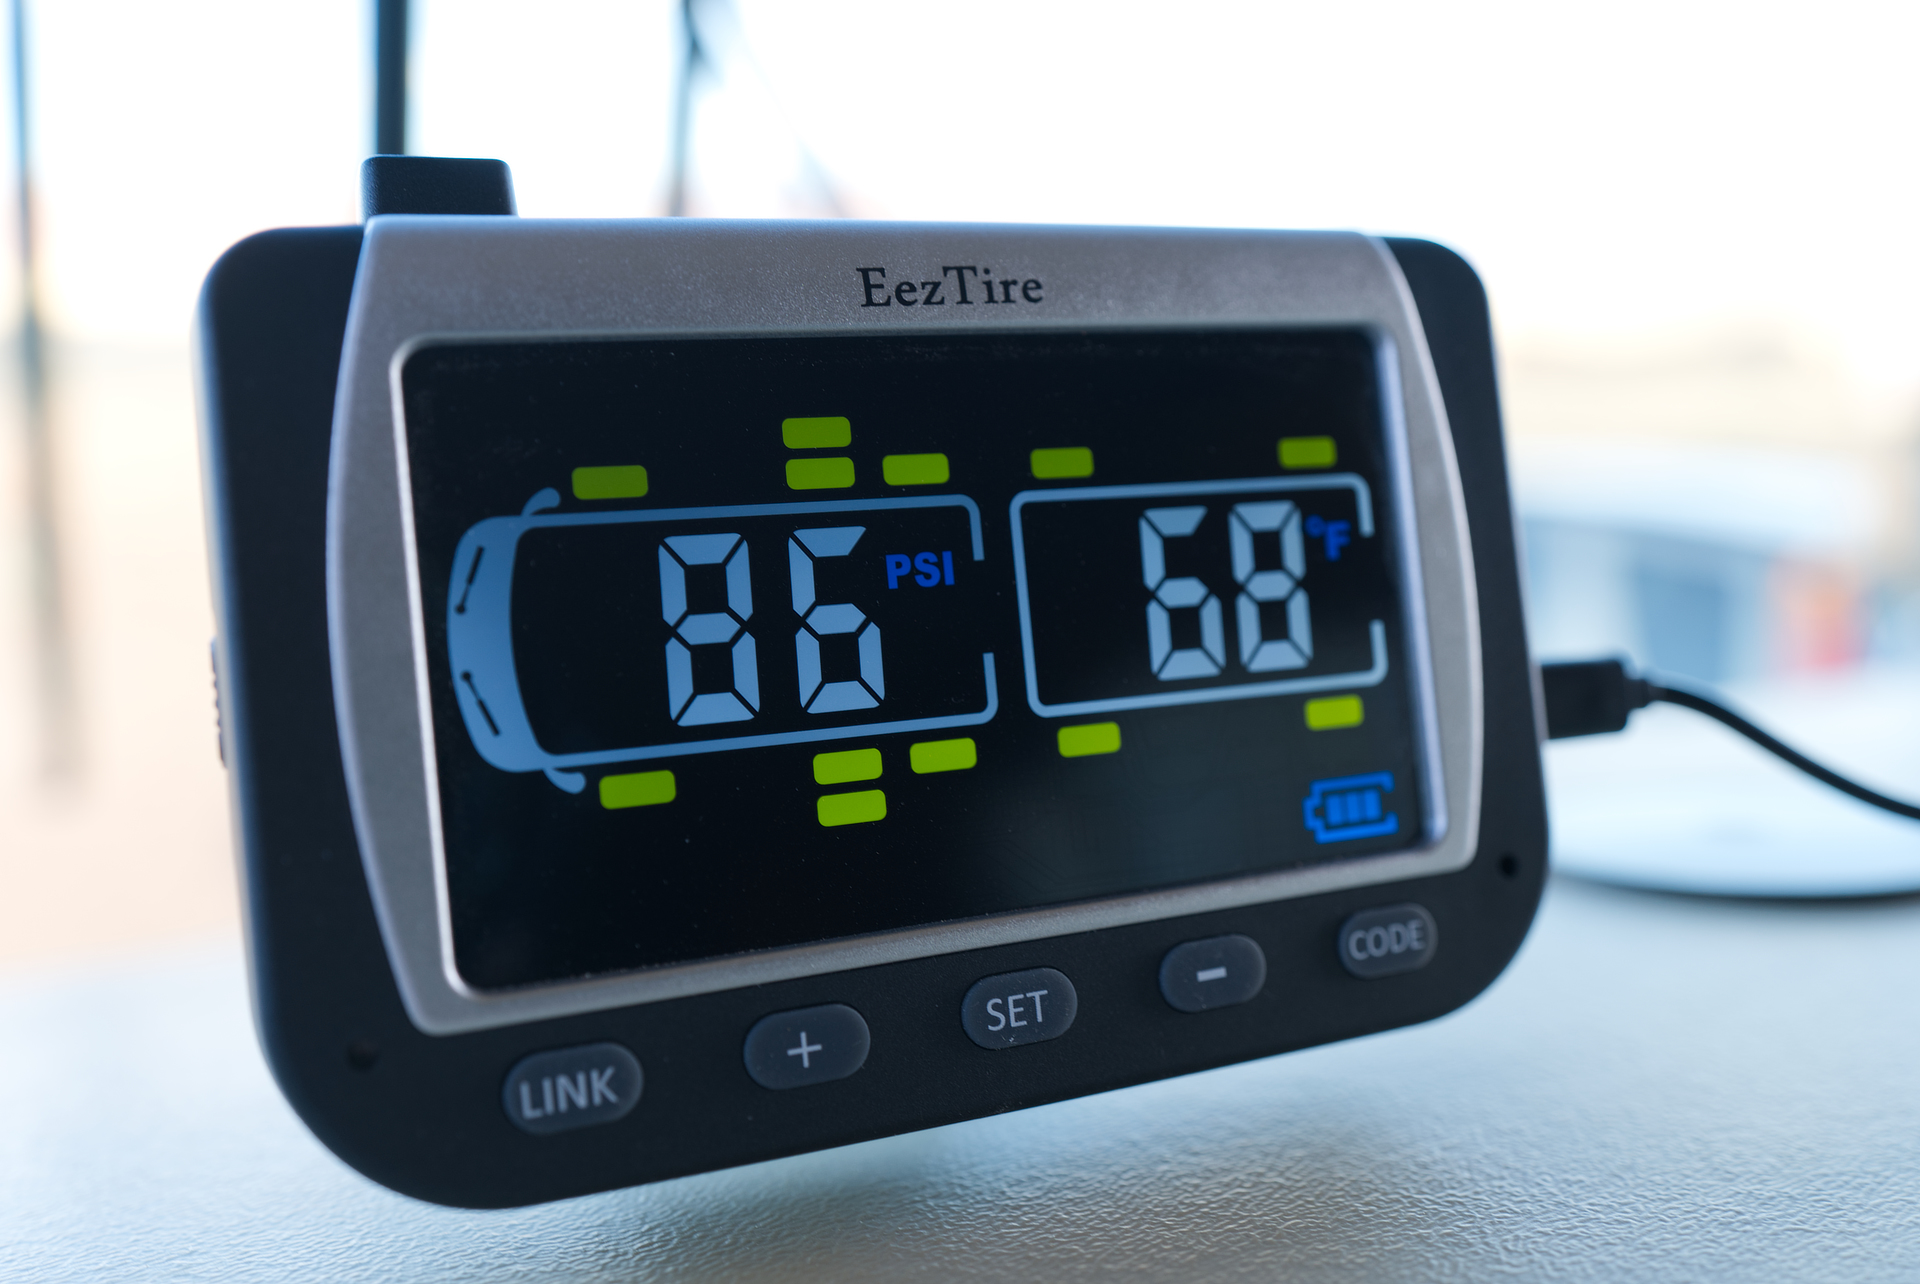 The monitor screen of our EEZTire RV TPMS